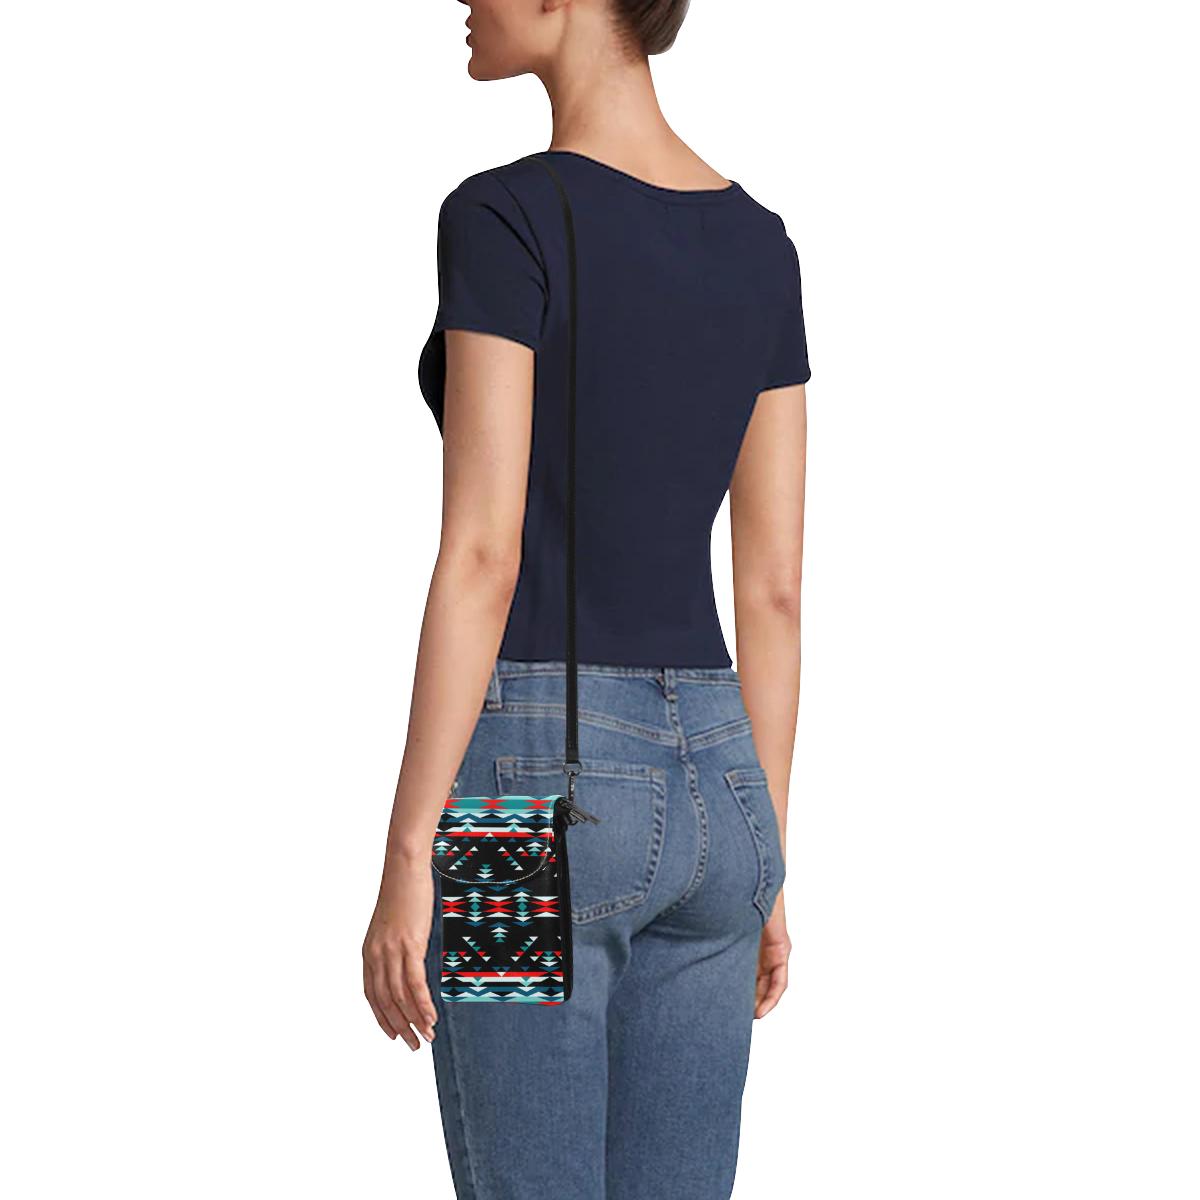 Visions of Peaceful Nights Small Cell Phone Purse (Model 1711) Small Cell Phone Purse (1711) e-joyer 